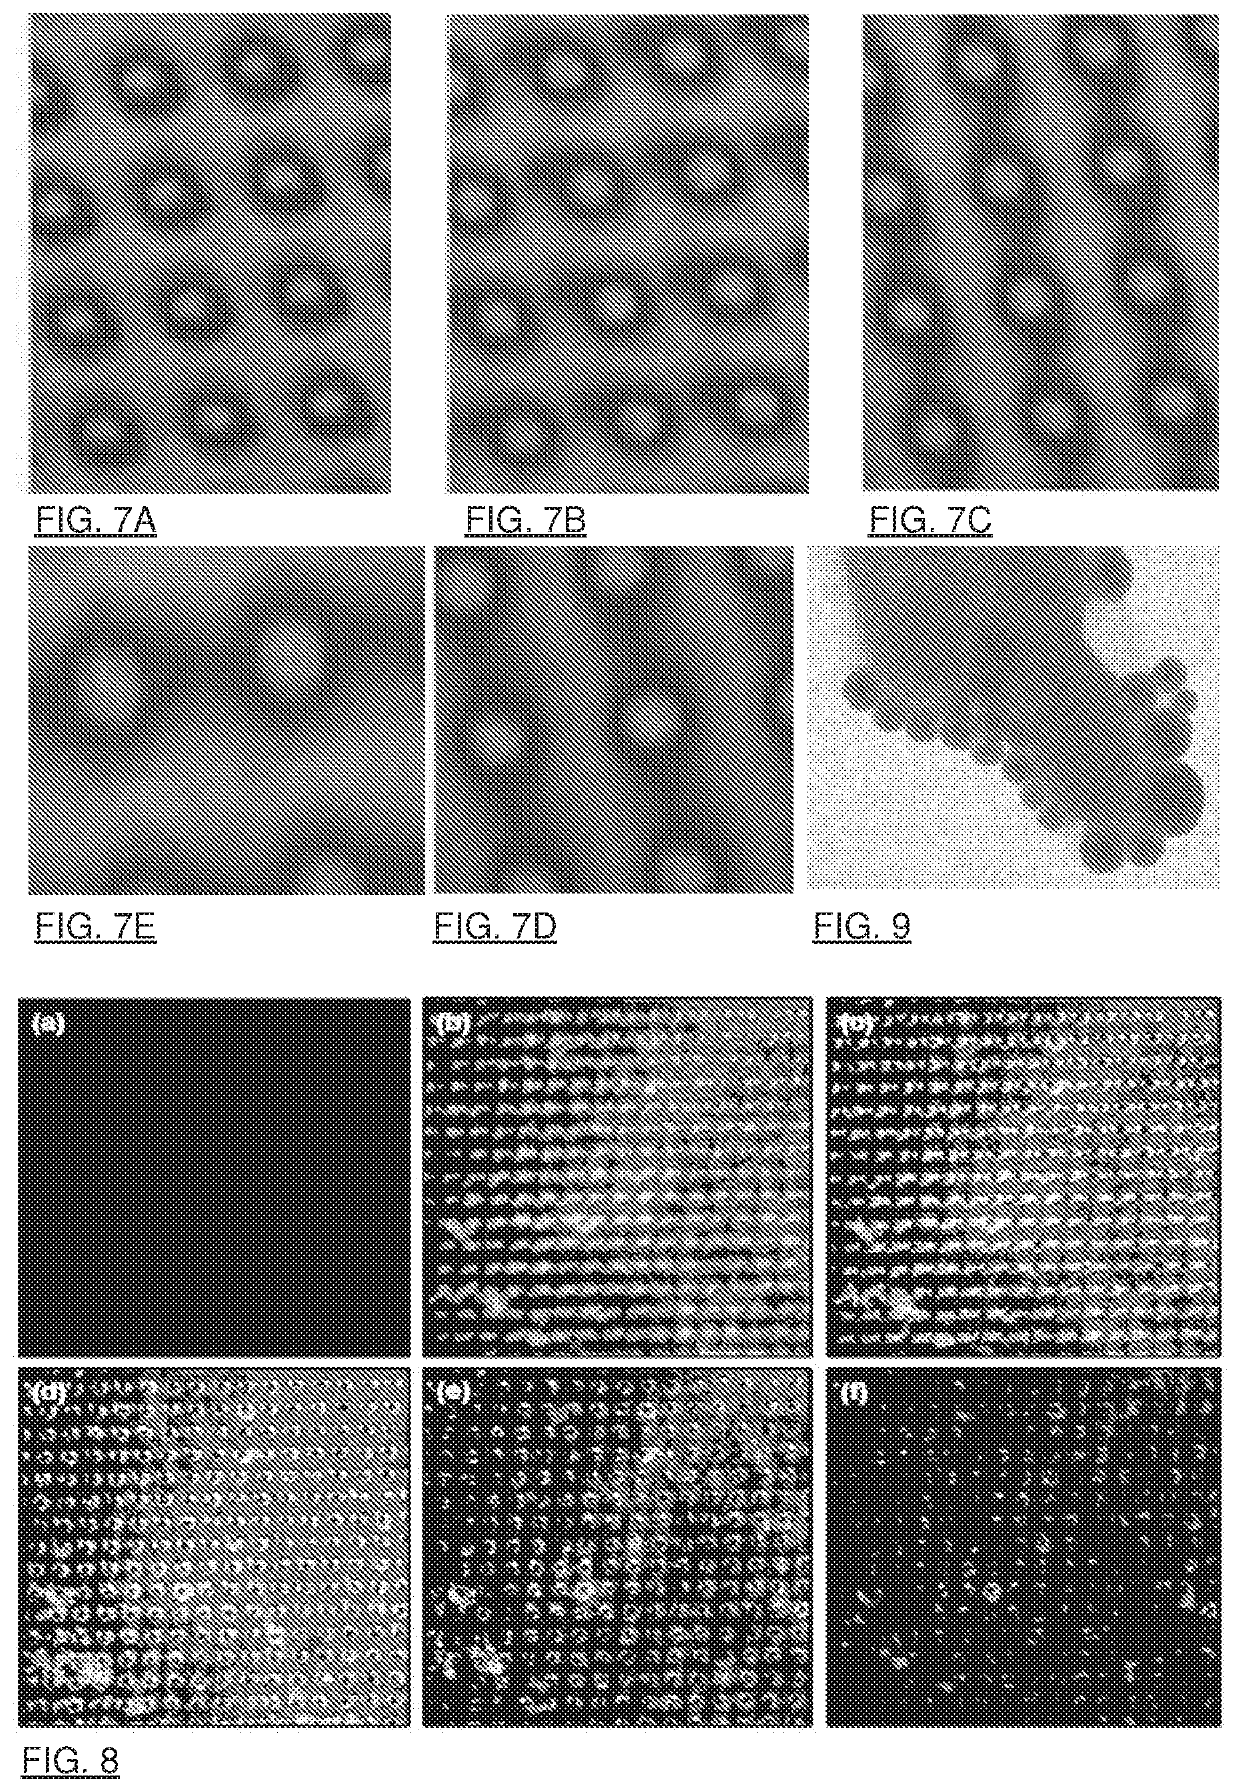 Magnetic Nanoparticle Distribution in Microfluidic Chip